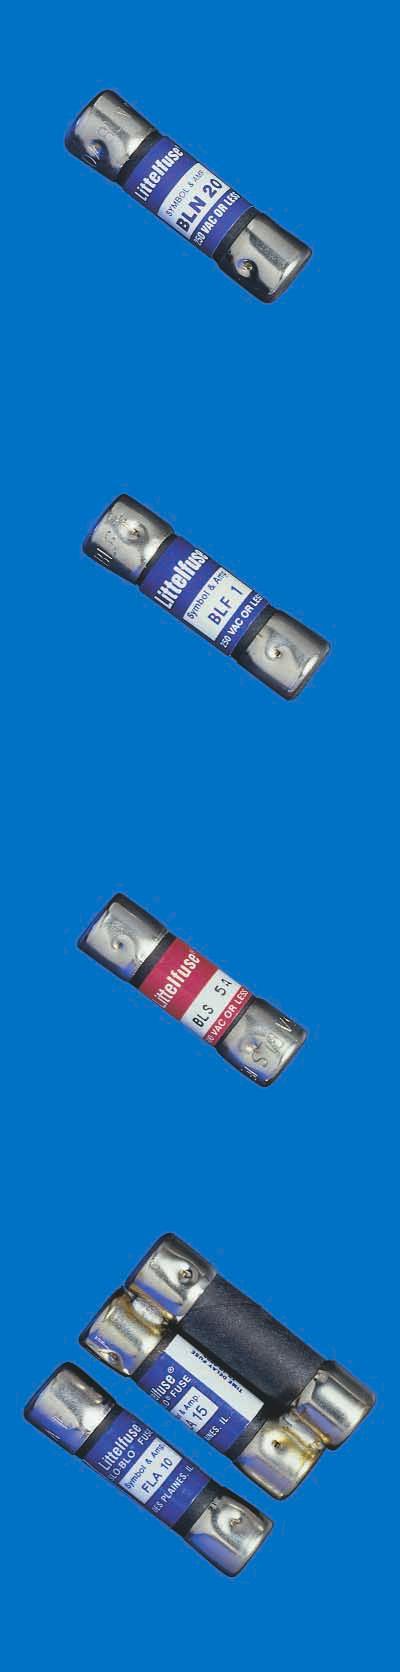 Midget Fuses Supplementary Overcurrent Protection BLN Fuses FAST-ACTING 50 VAC Fiber tube, 50 volt BLN fuses provide lowcost protection for military applications and control circuits.